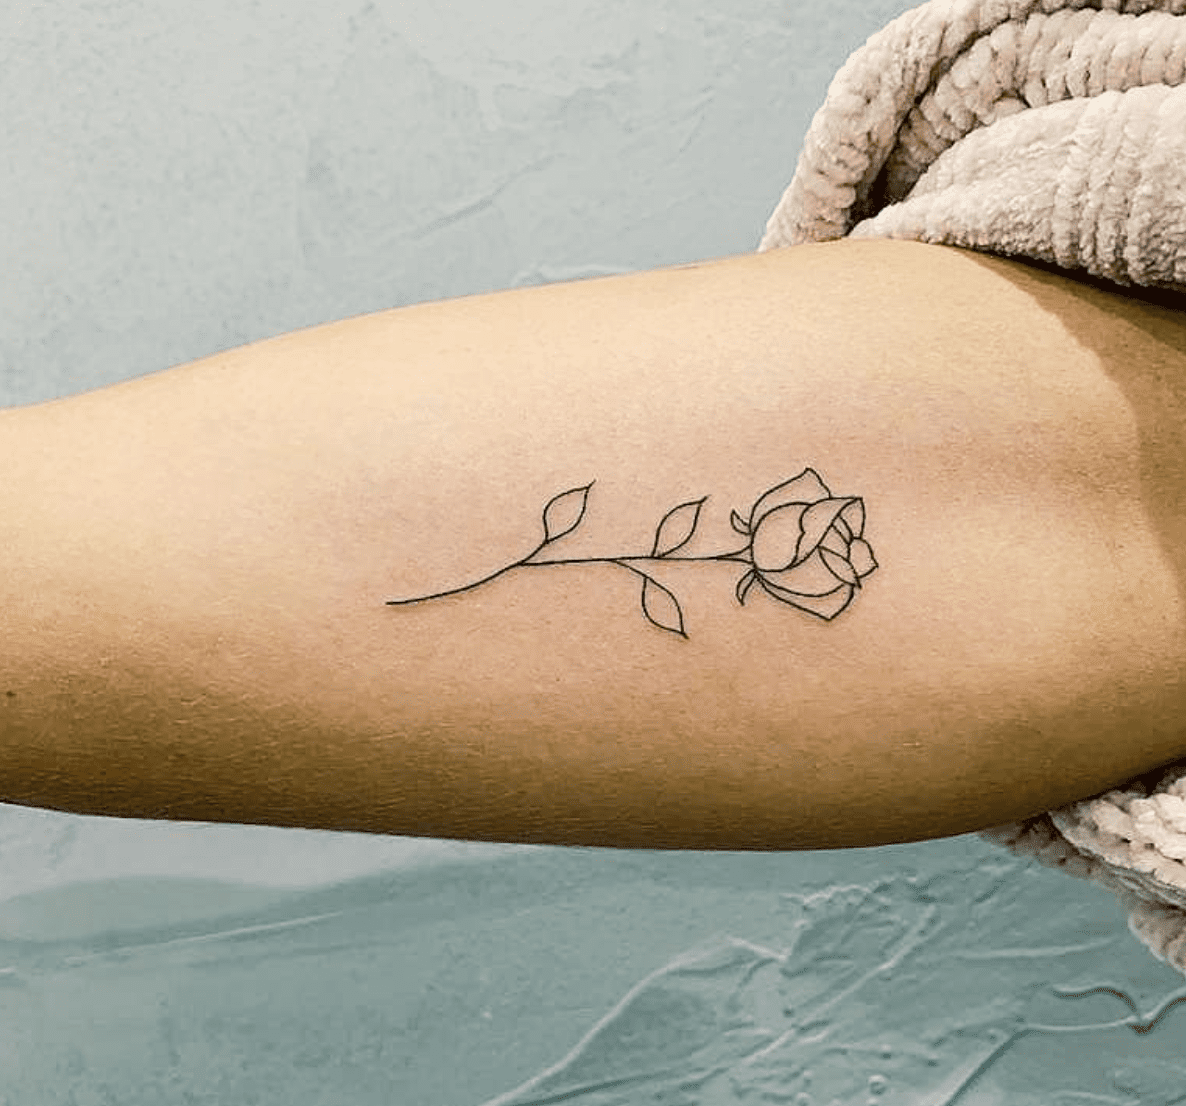 40 Rose Tattoos We Can't Stop Staring At